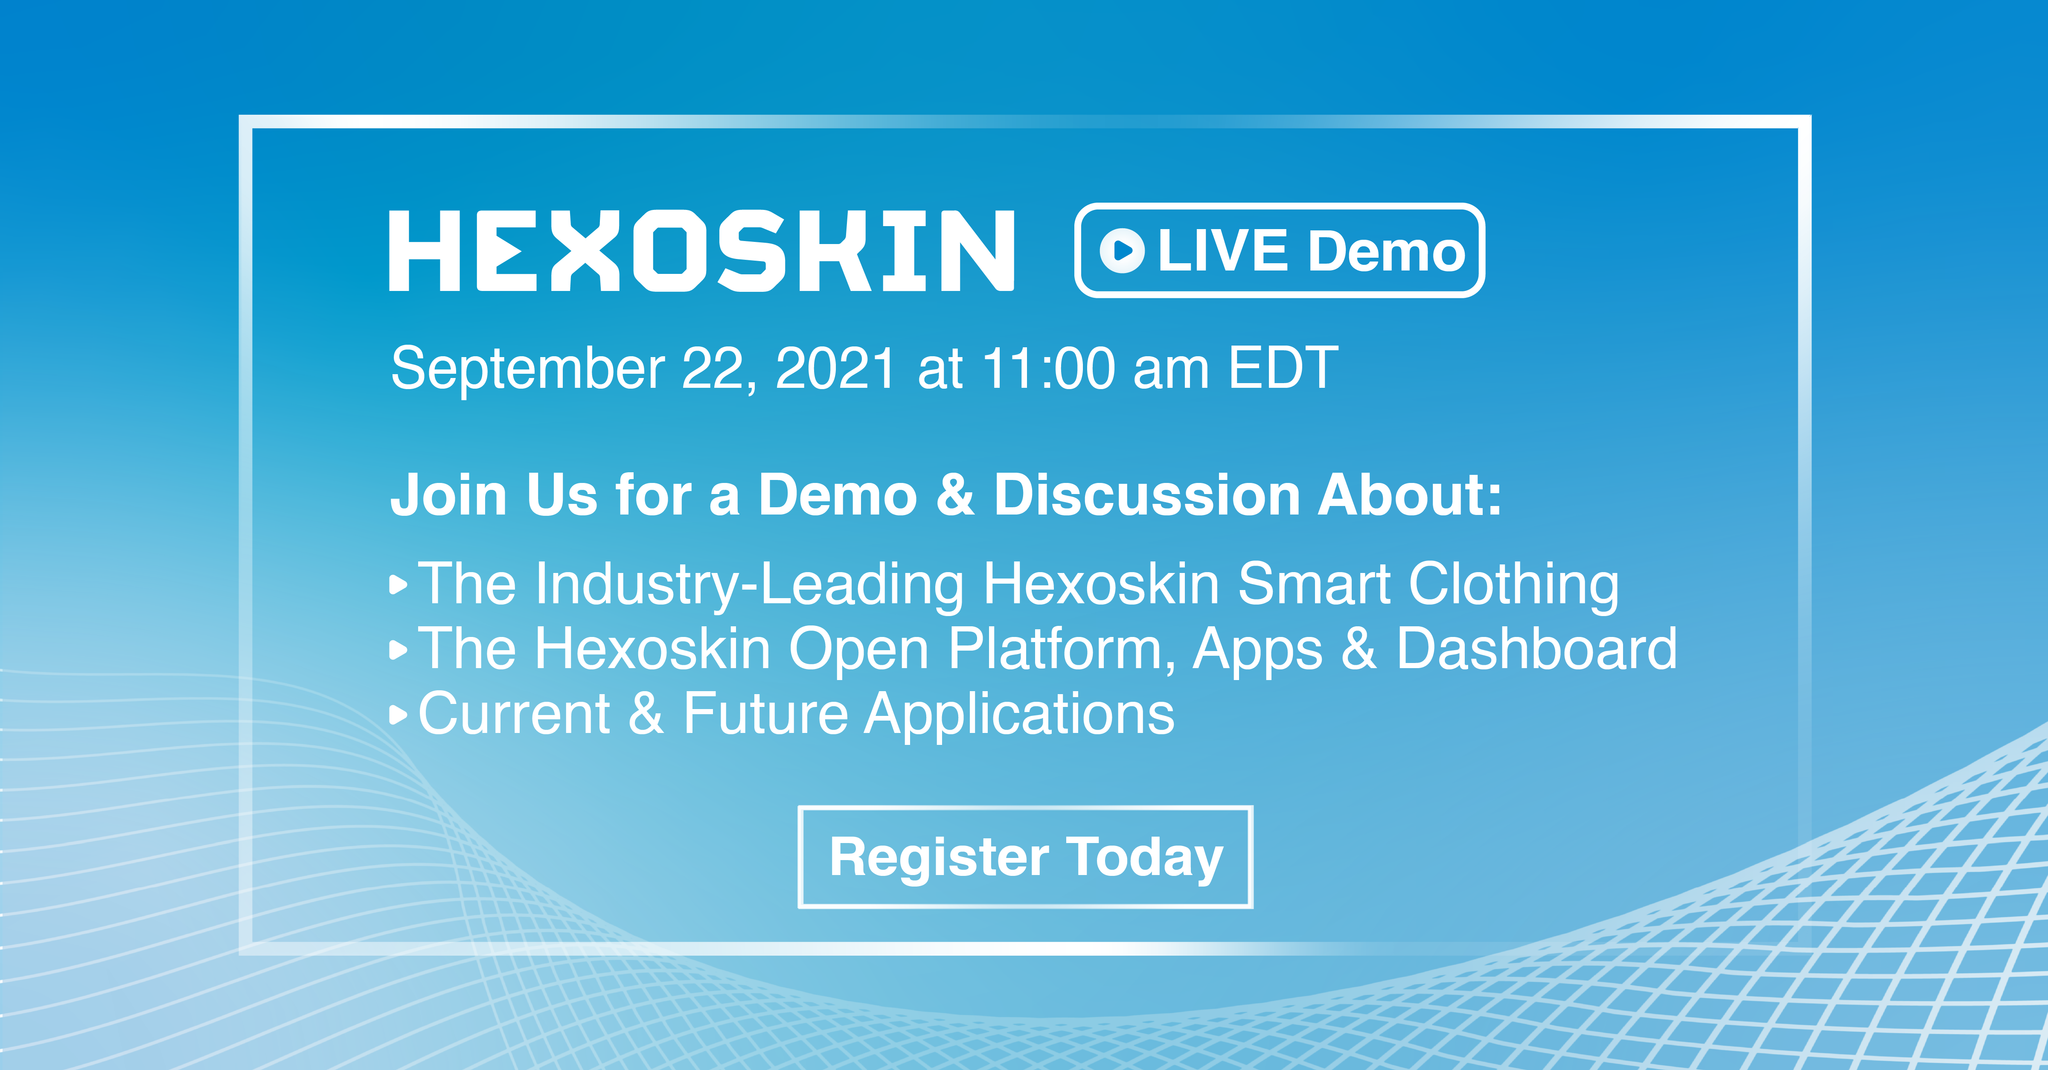 Hexoskin Live Demo - Register to attend our Smart Clothing Demo